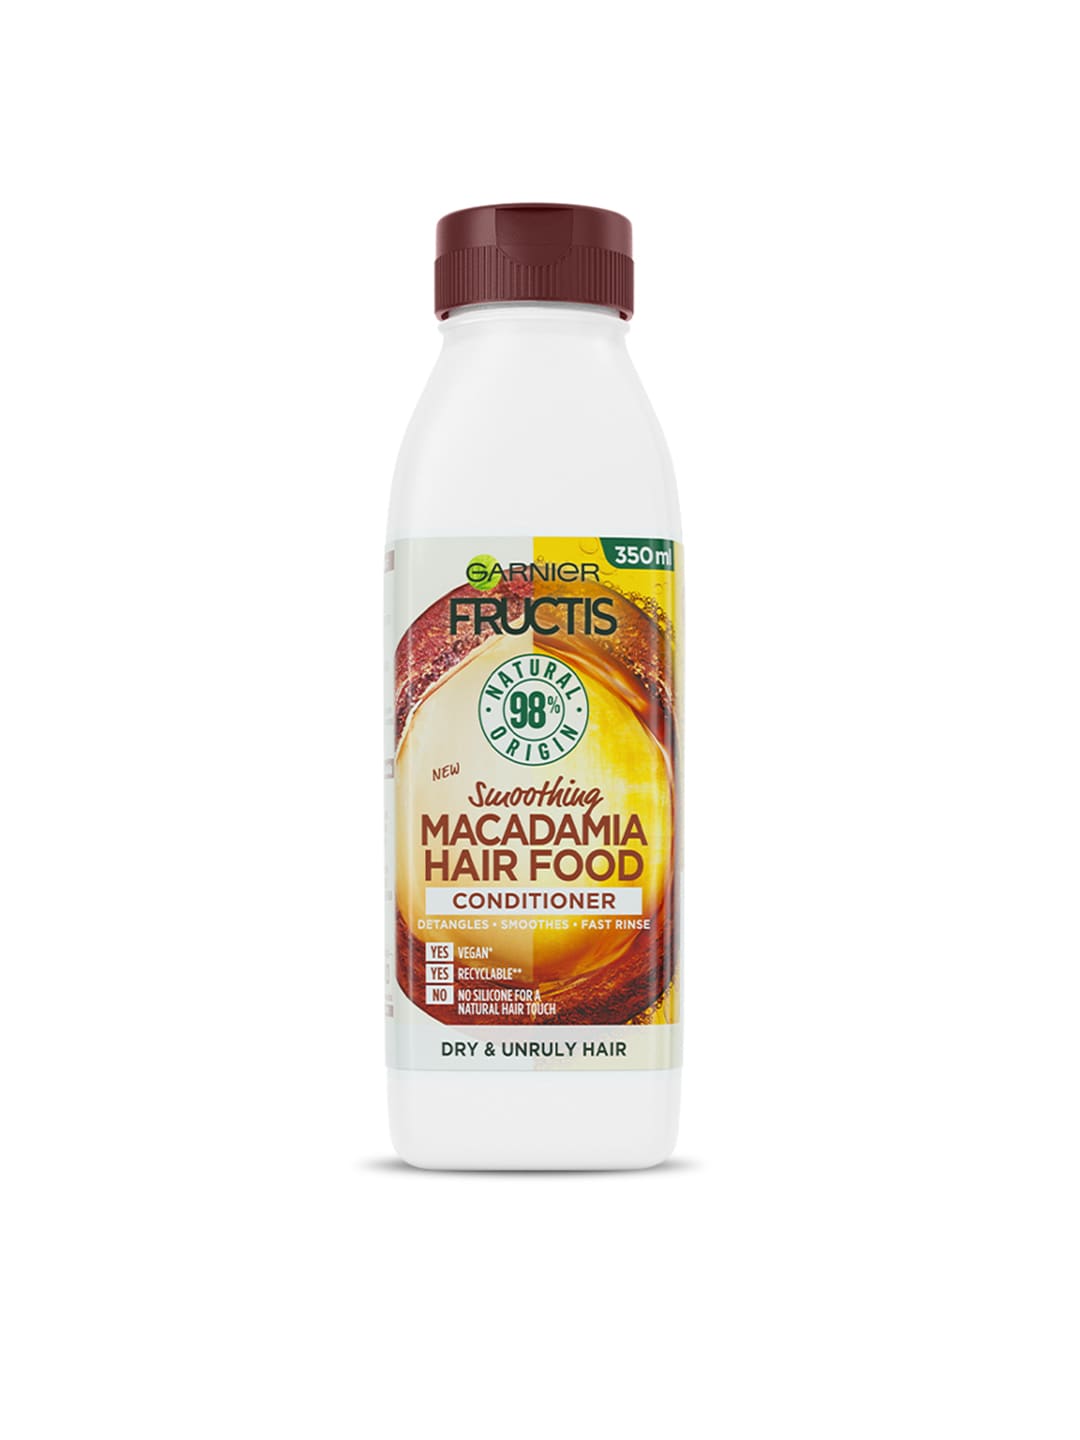 Garnier Fructis Hair Food - Smoothing Macadamia Conditioner For Dry Unruly Hair 350ml Price in India